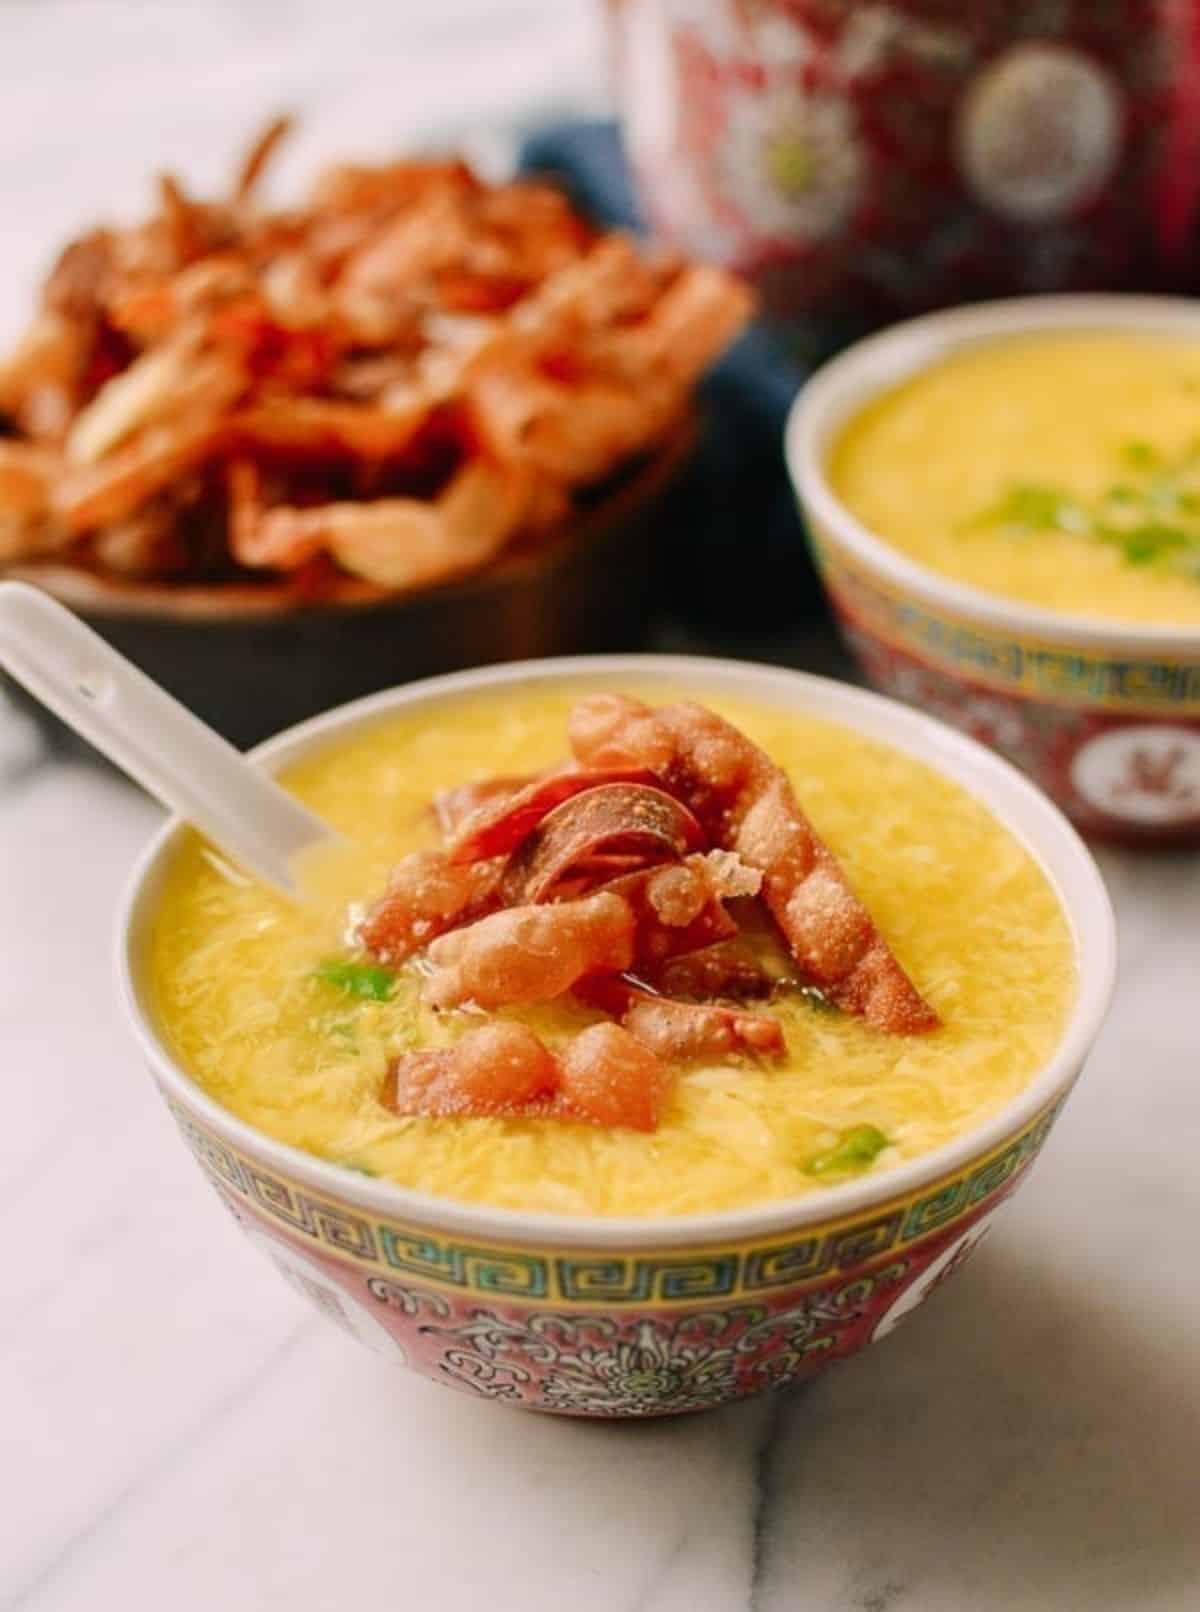 Delicious egg drop soup in a small bowl.